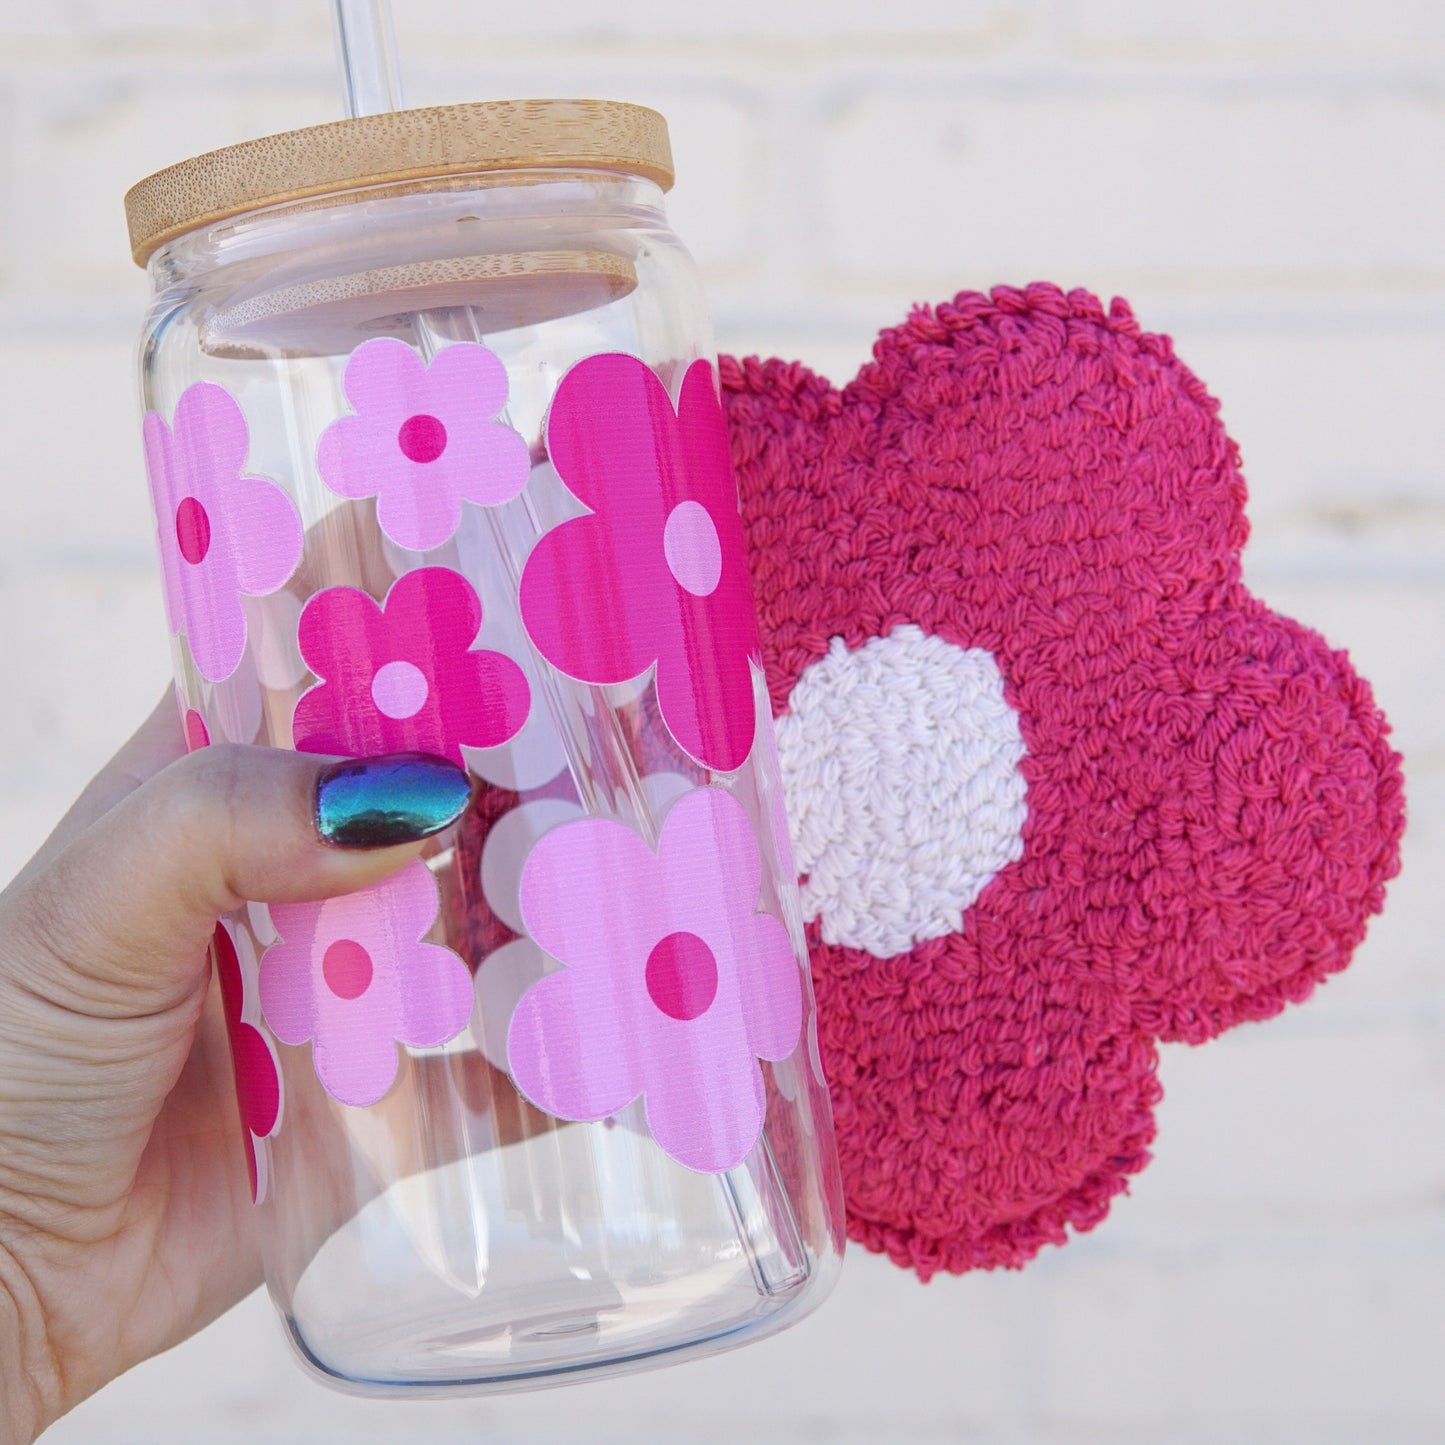 16oz Cute Pink Daisy Glass Can Cup and Mug Rug Gift Set